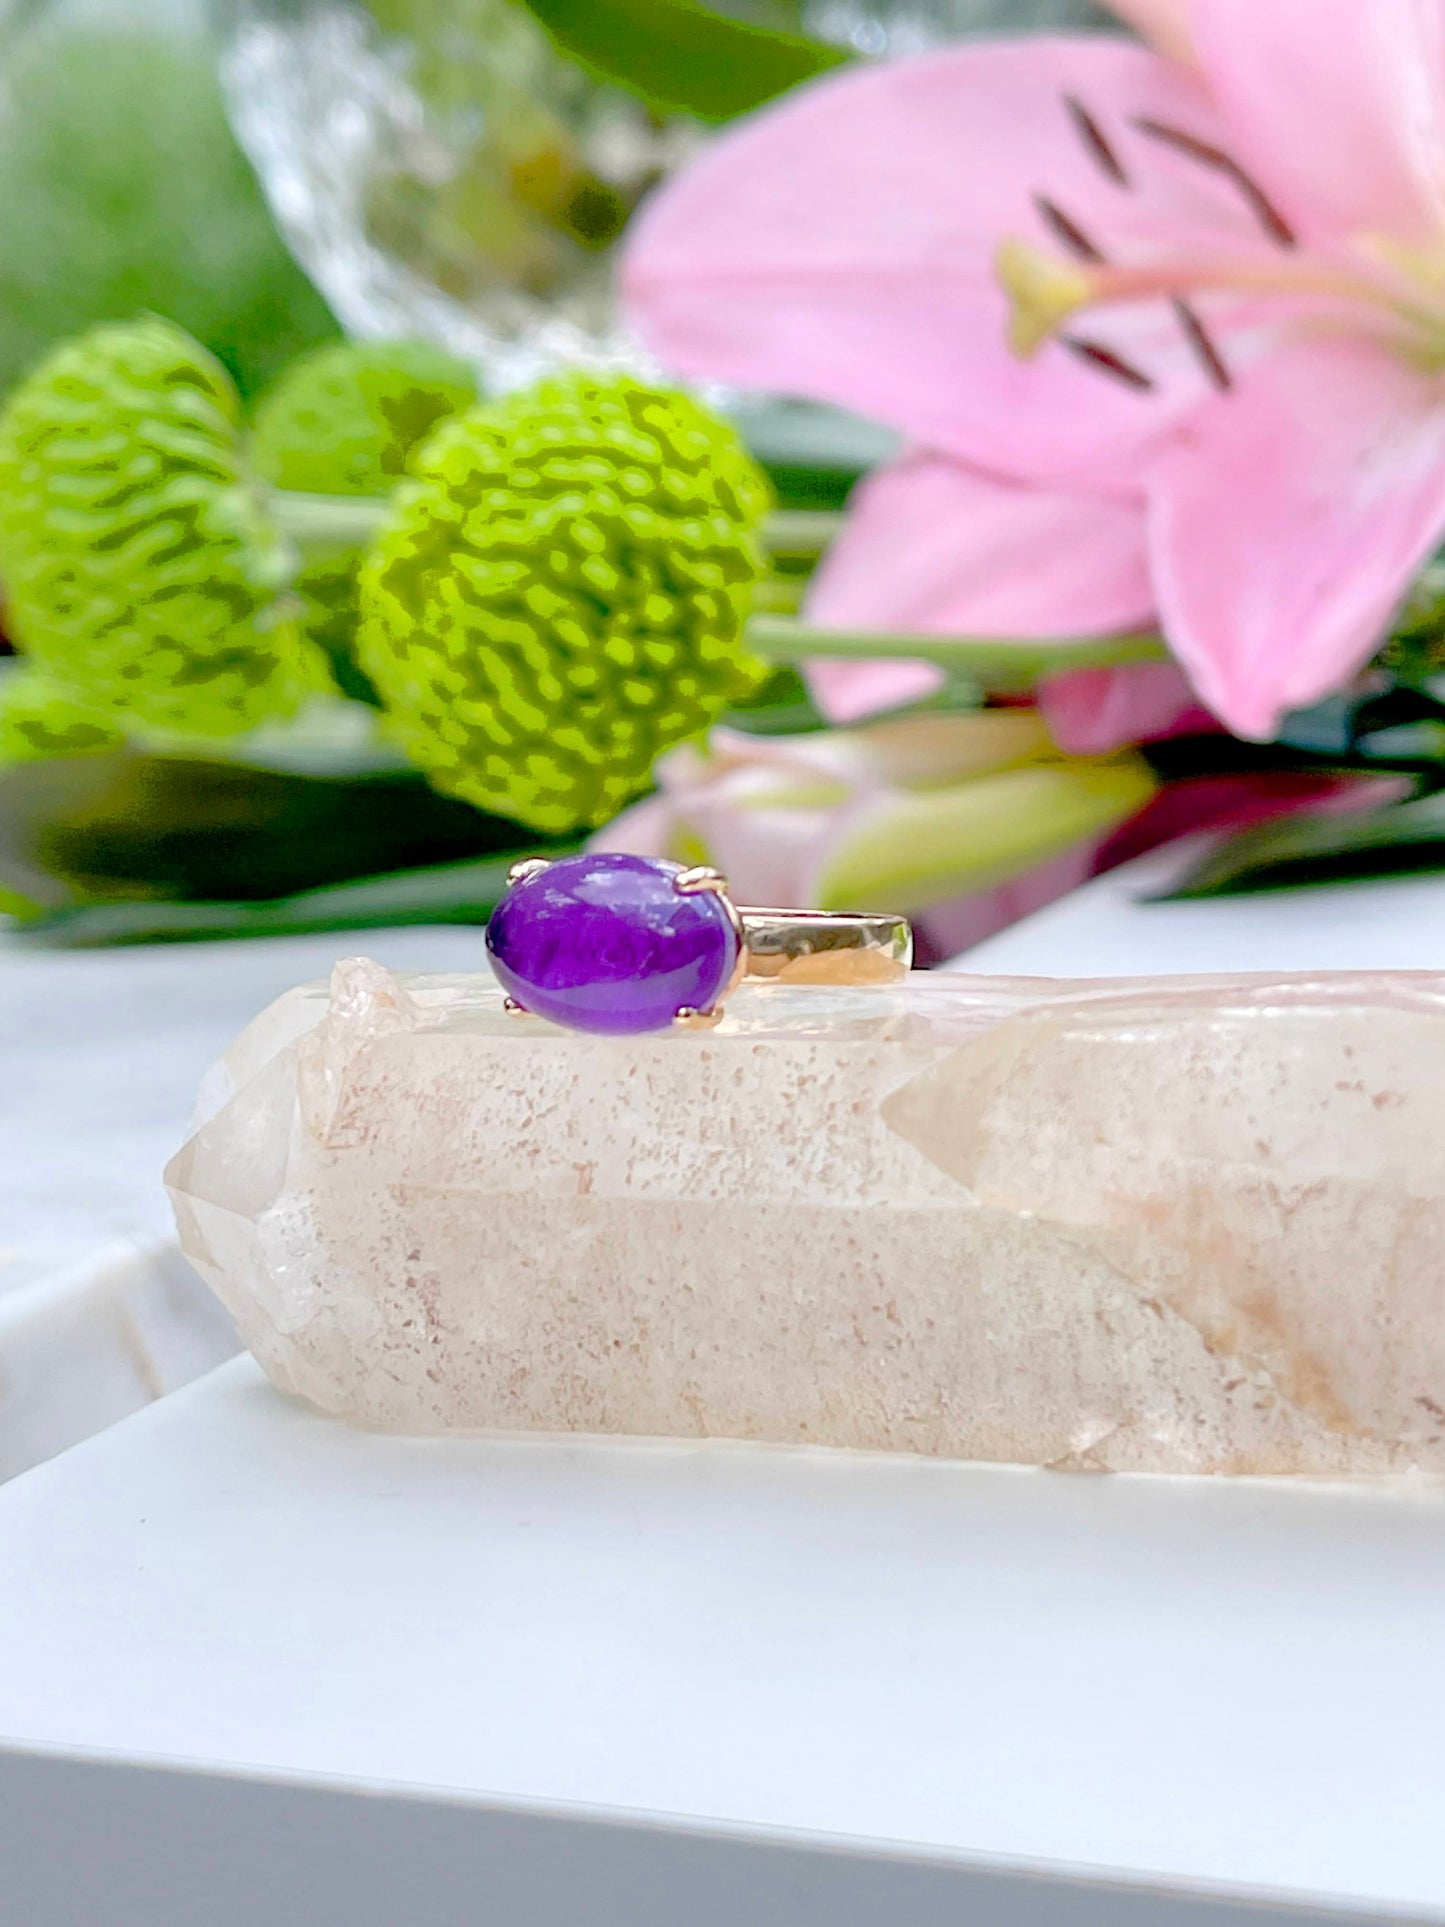 Amethyst fusion oval ring in 18K gold